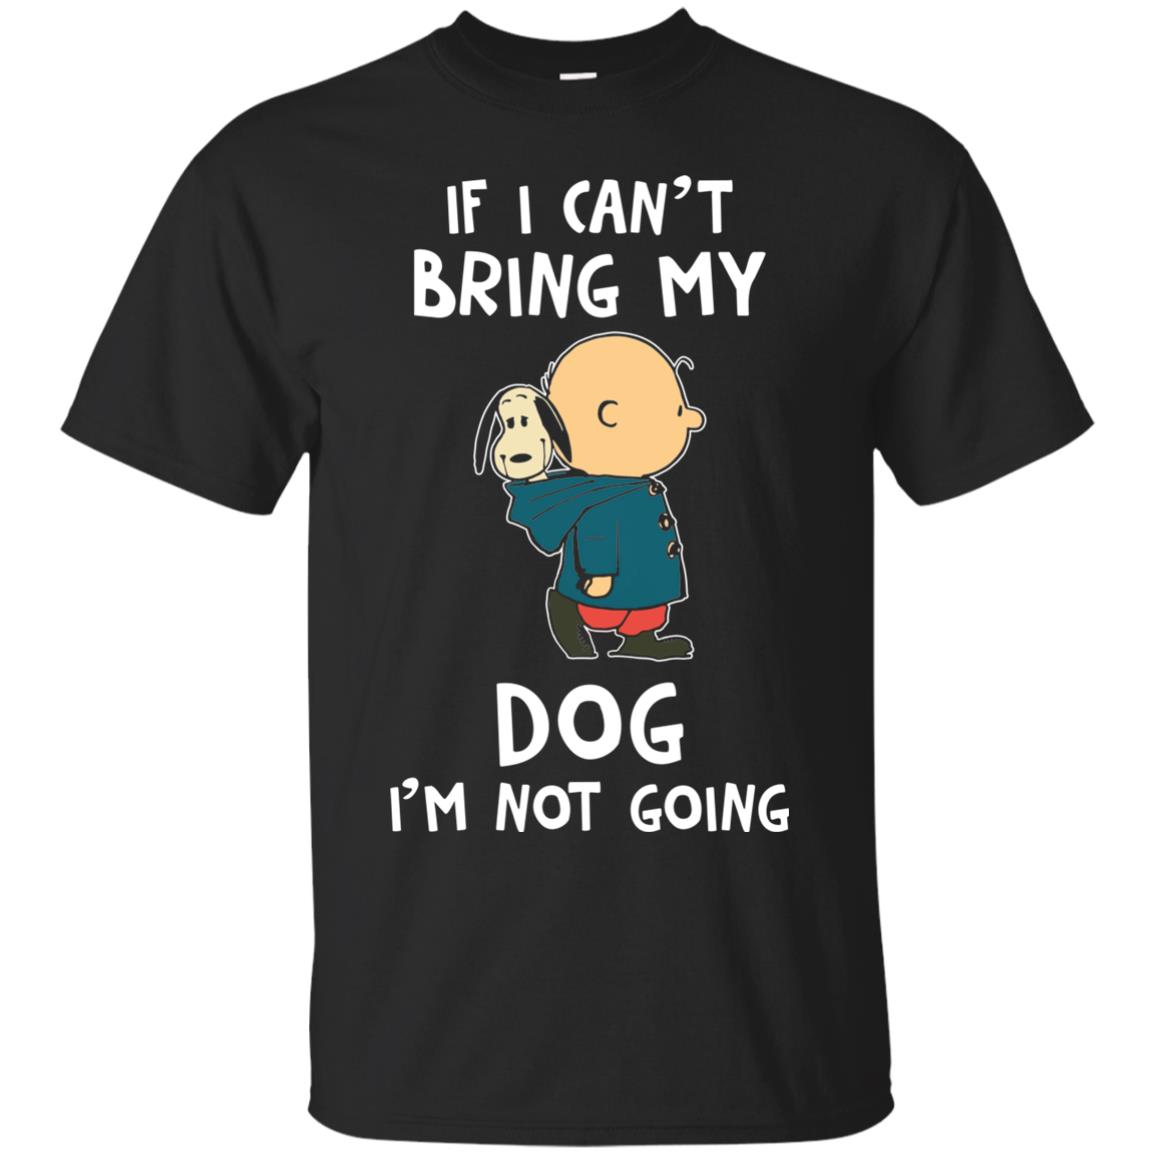 Snoopy and Charlie Brown - If I Can't Bring My Dog I'm Not Going T Shirts, Hoodies